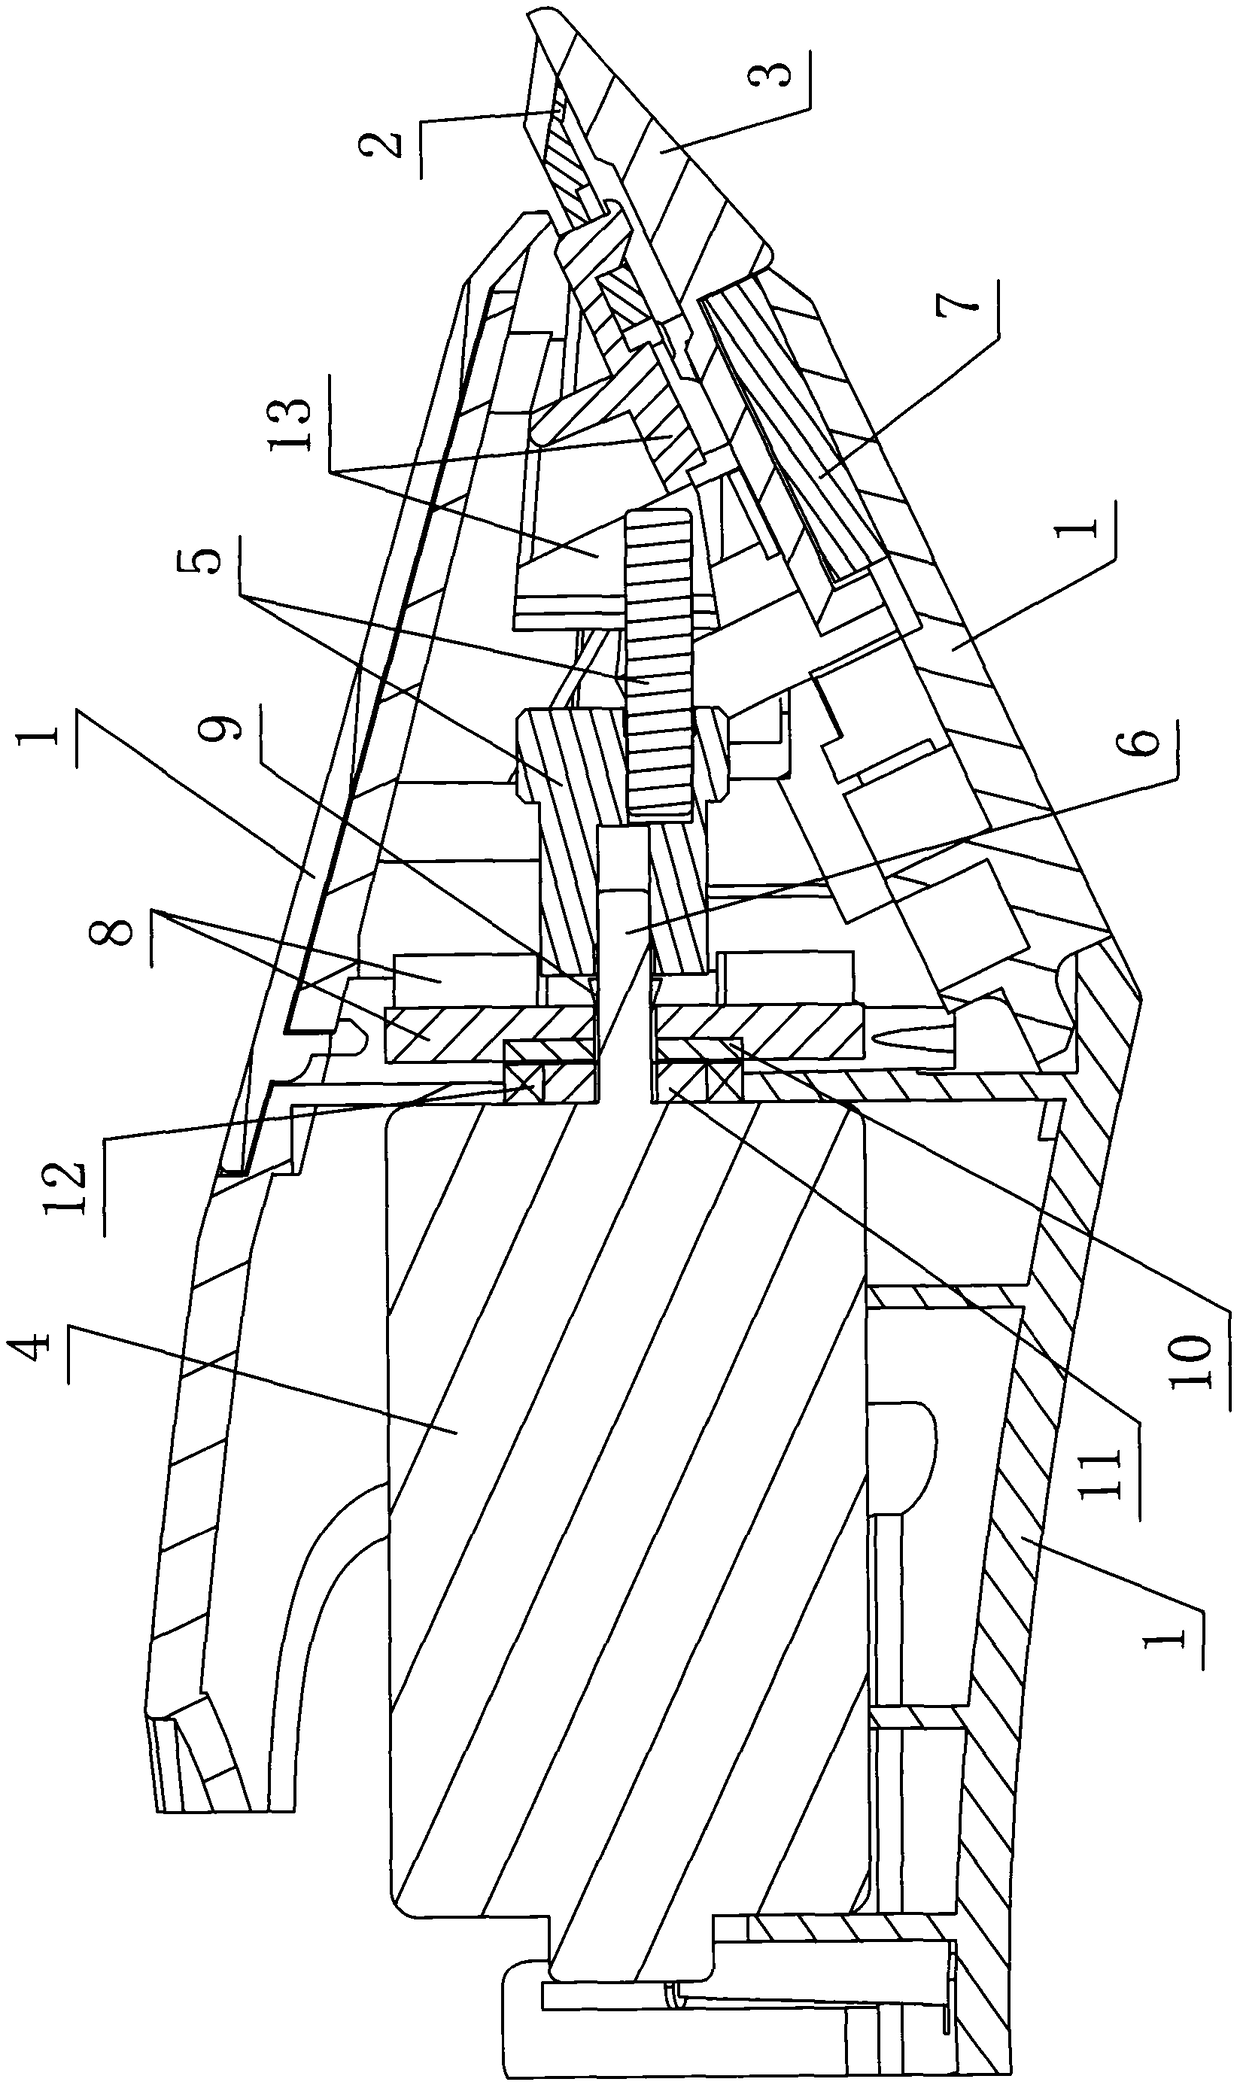 Electric clipper and control method